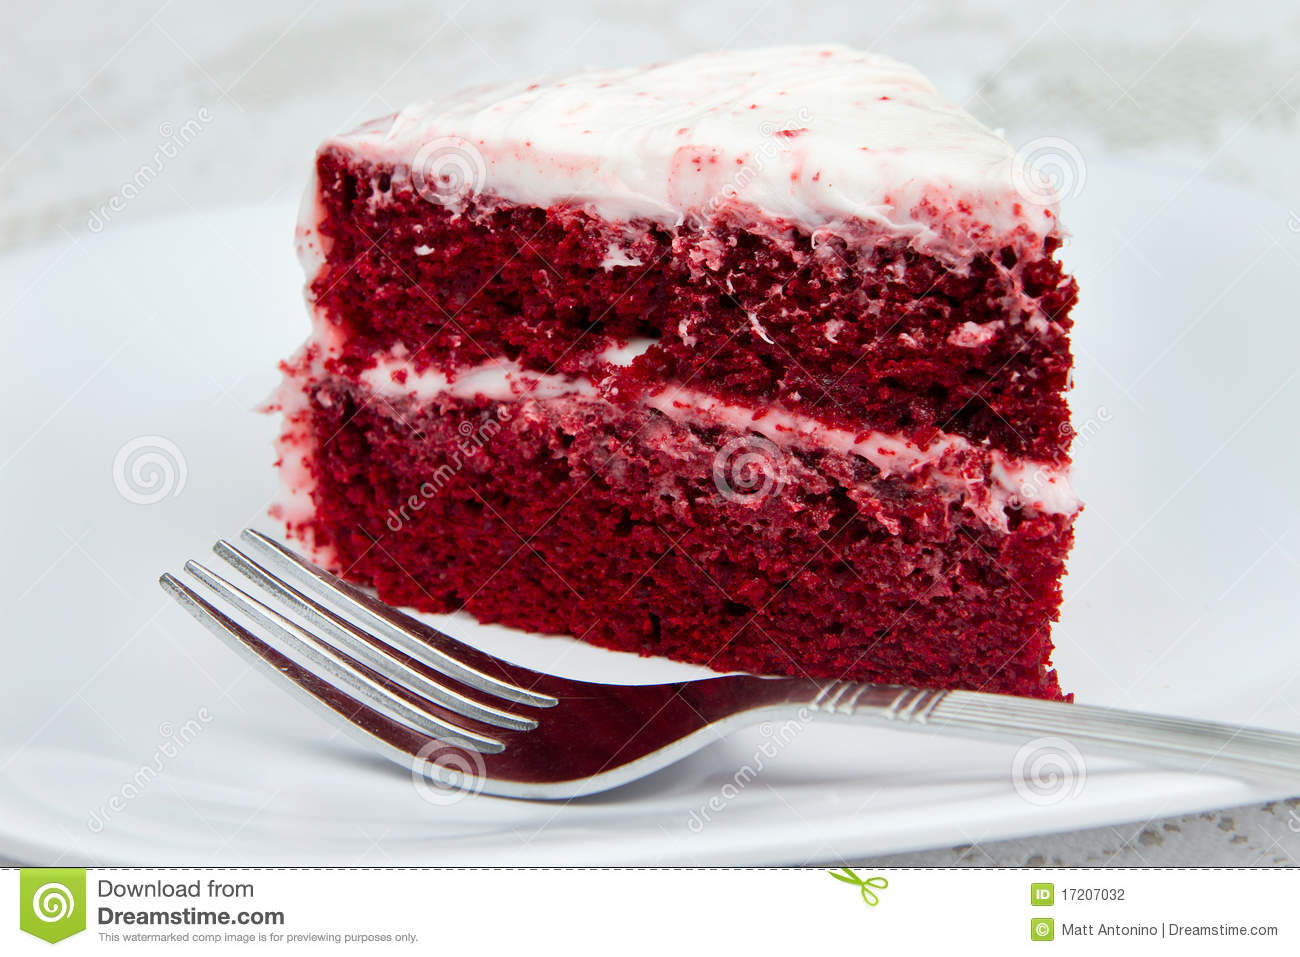 One Slice Of Red Velvet Cake With A Fork On A White Plate